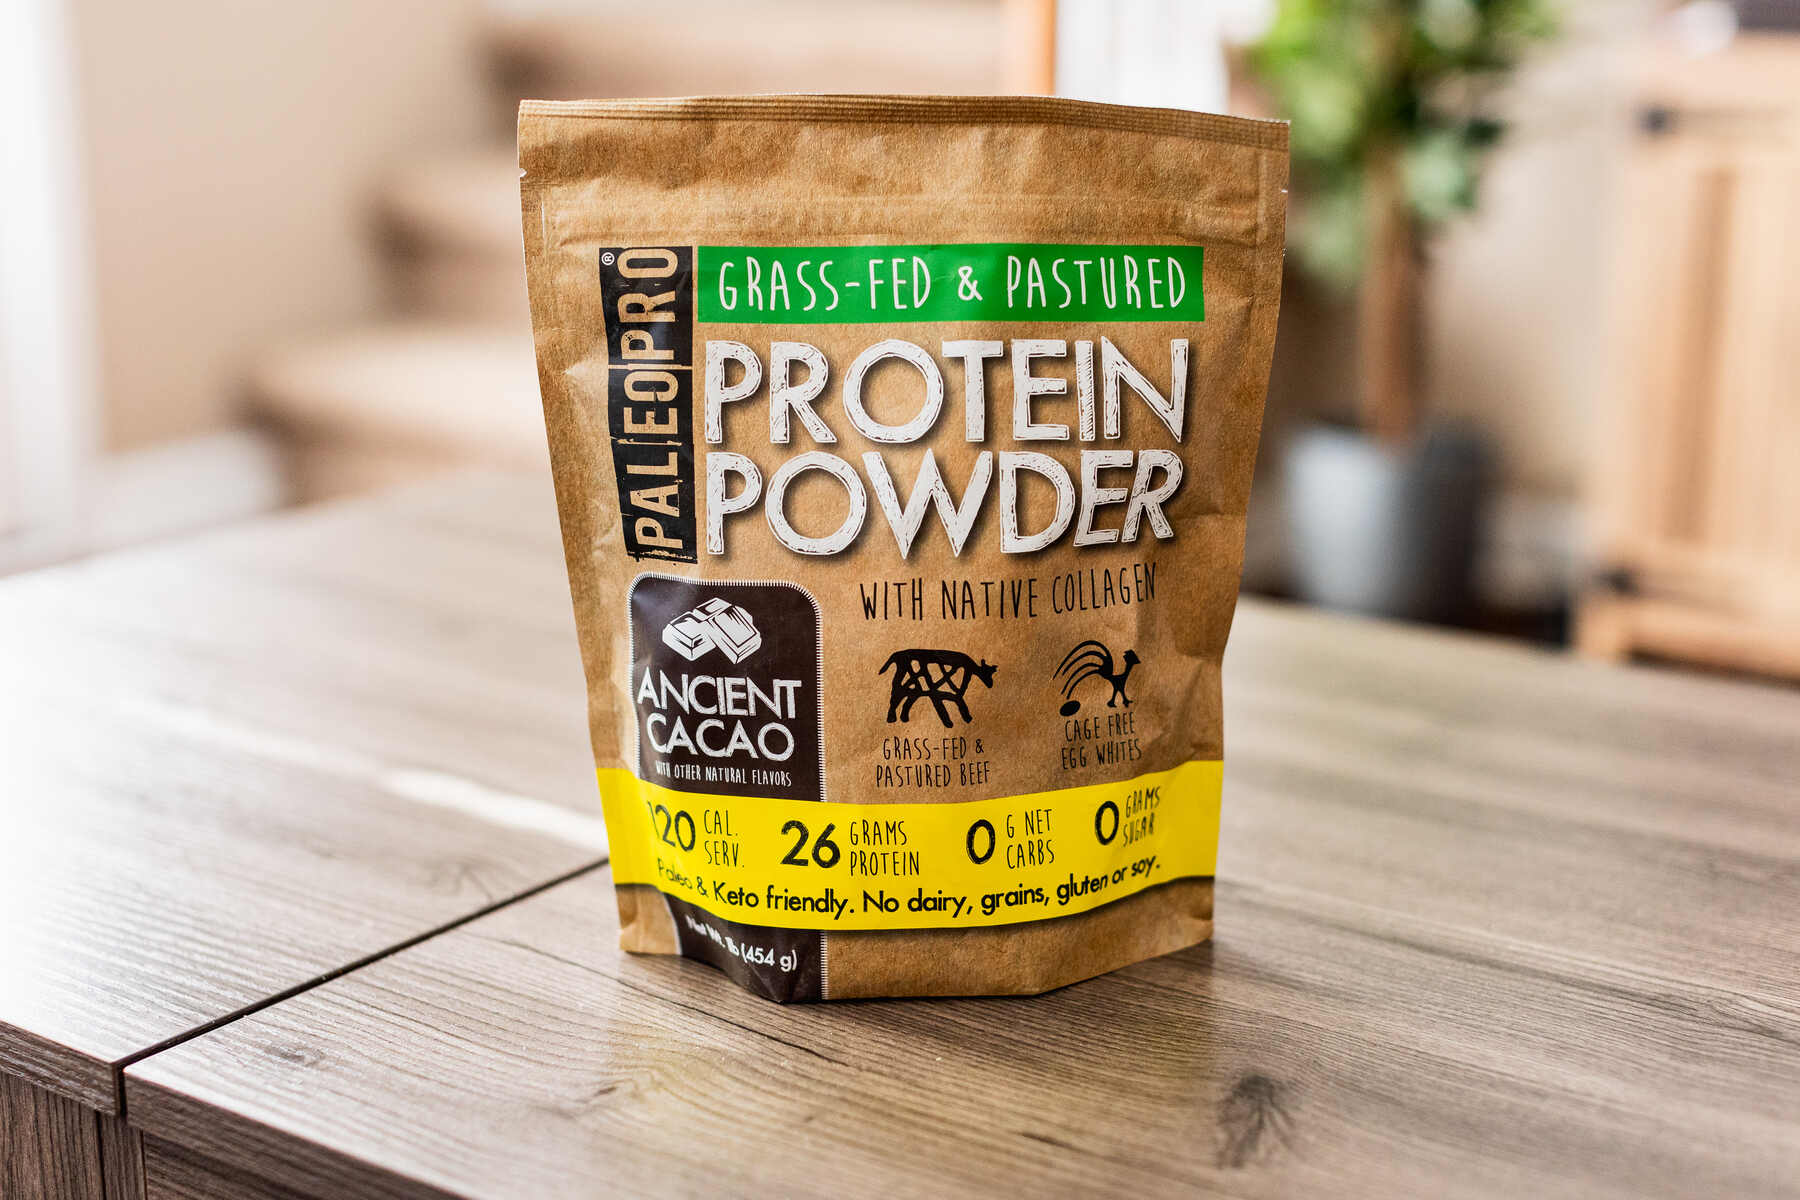 A bag of "PALEO PRO" Grass-Fed & Pastured Protein Powder with native collagen